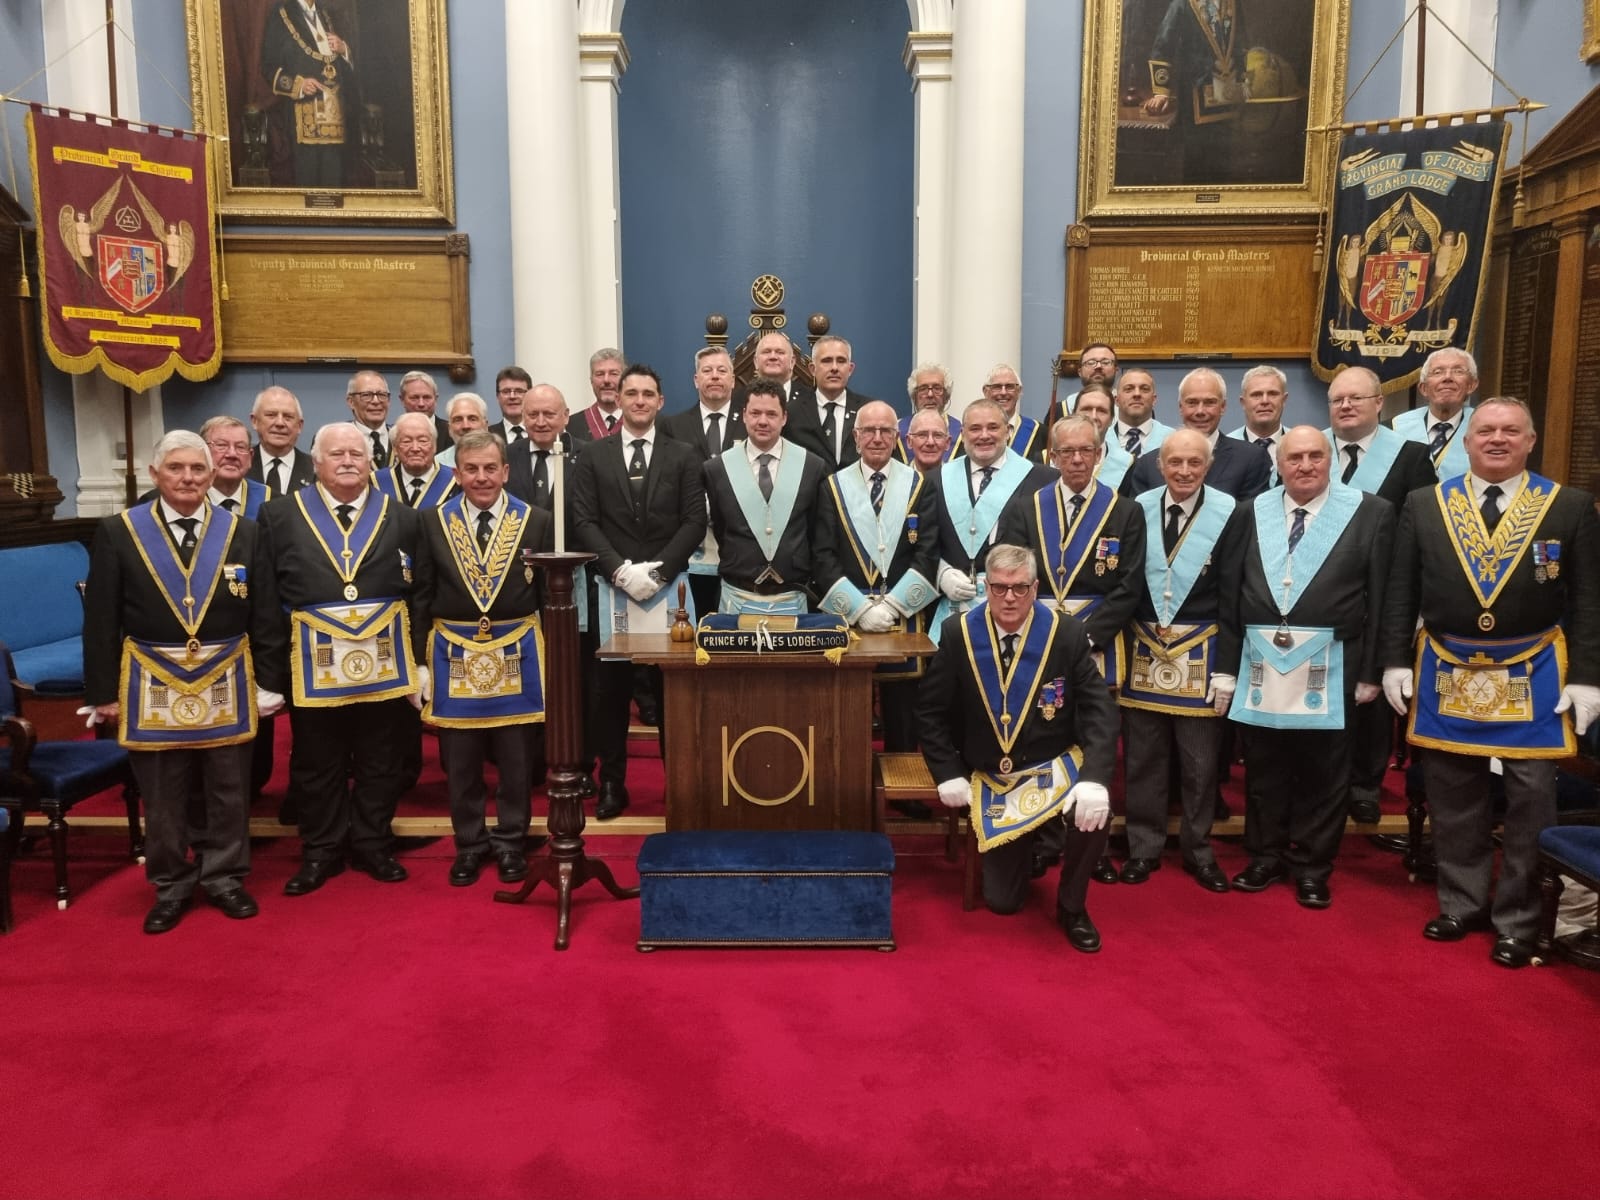 The Prince of Wales Lodge on Tour